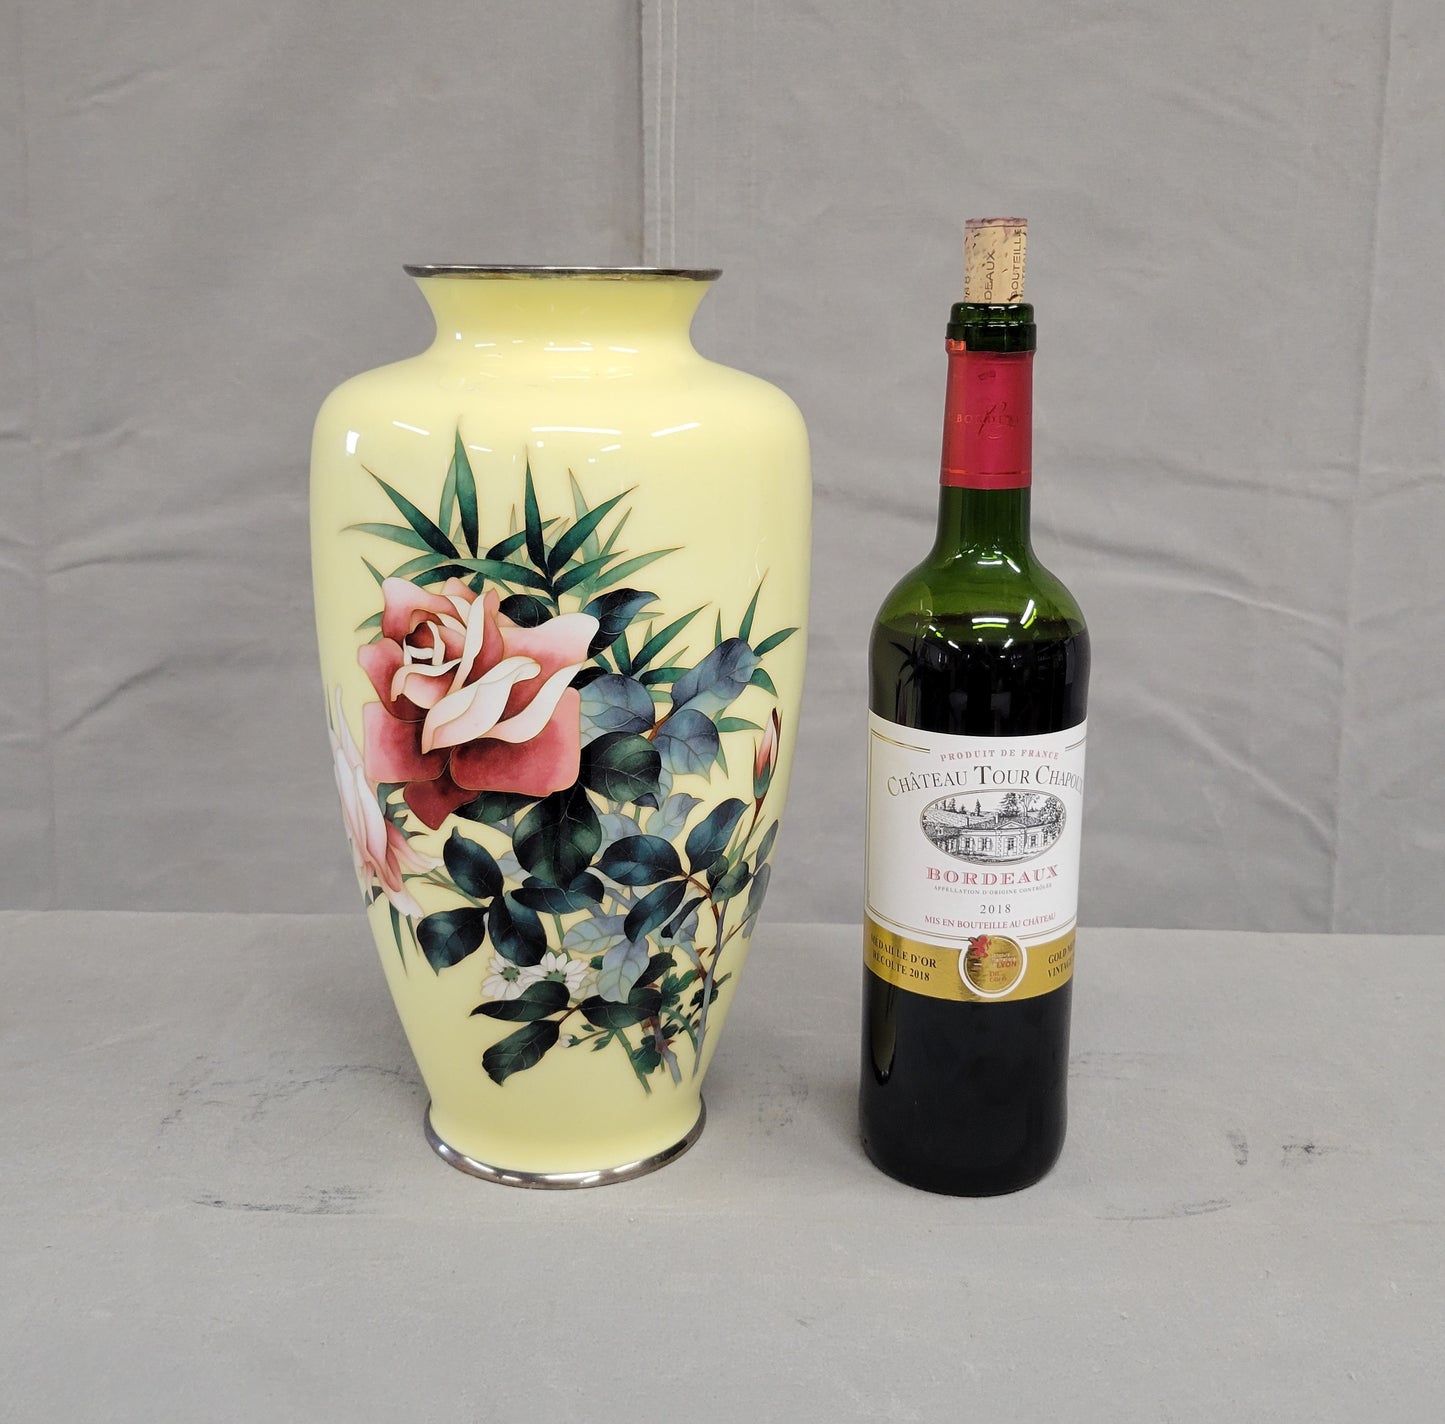 Vintage Japanese Ando Jubei (1876-1956) Signed Cloisonné Vase With Roses